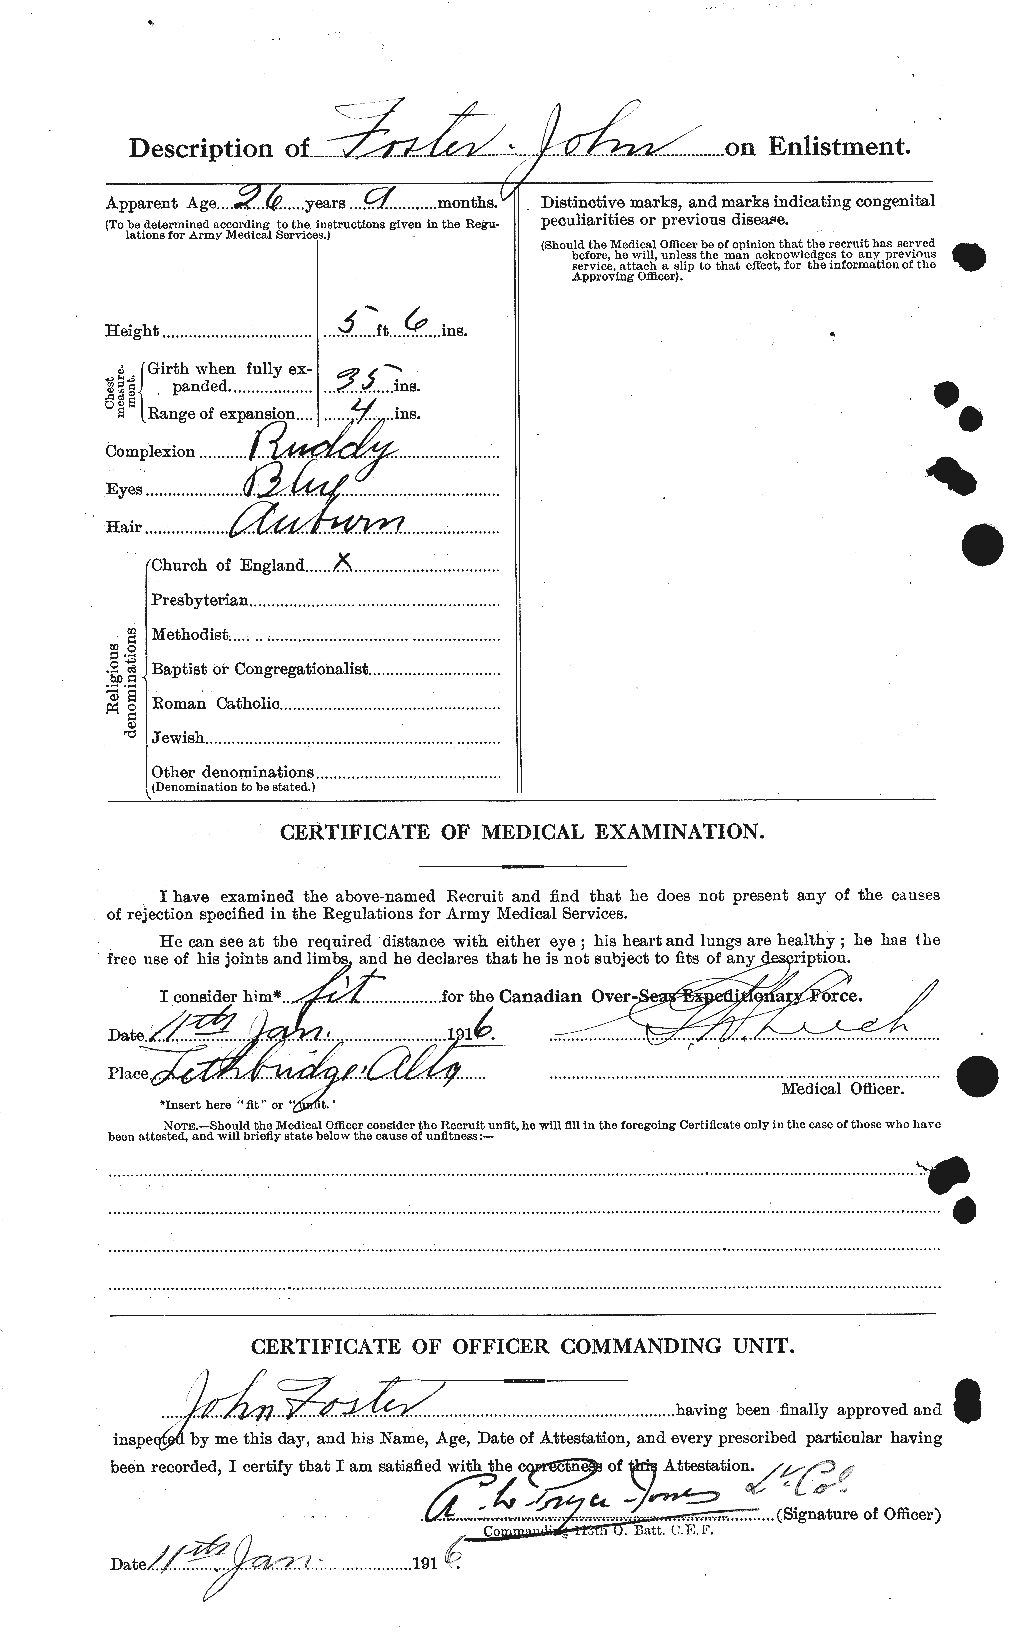 Personnel Records of the First World War - CEF 333332b